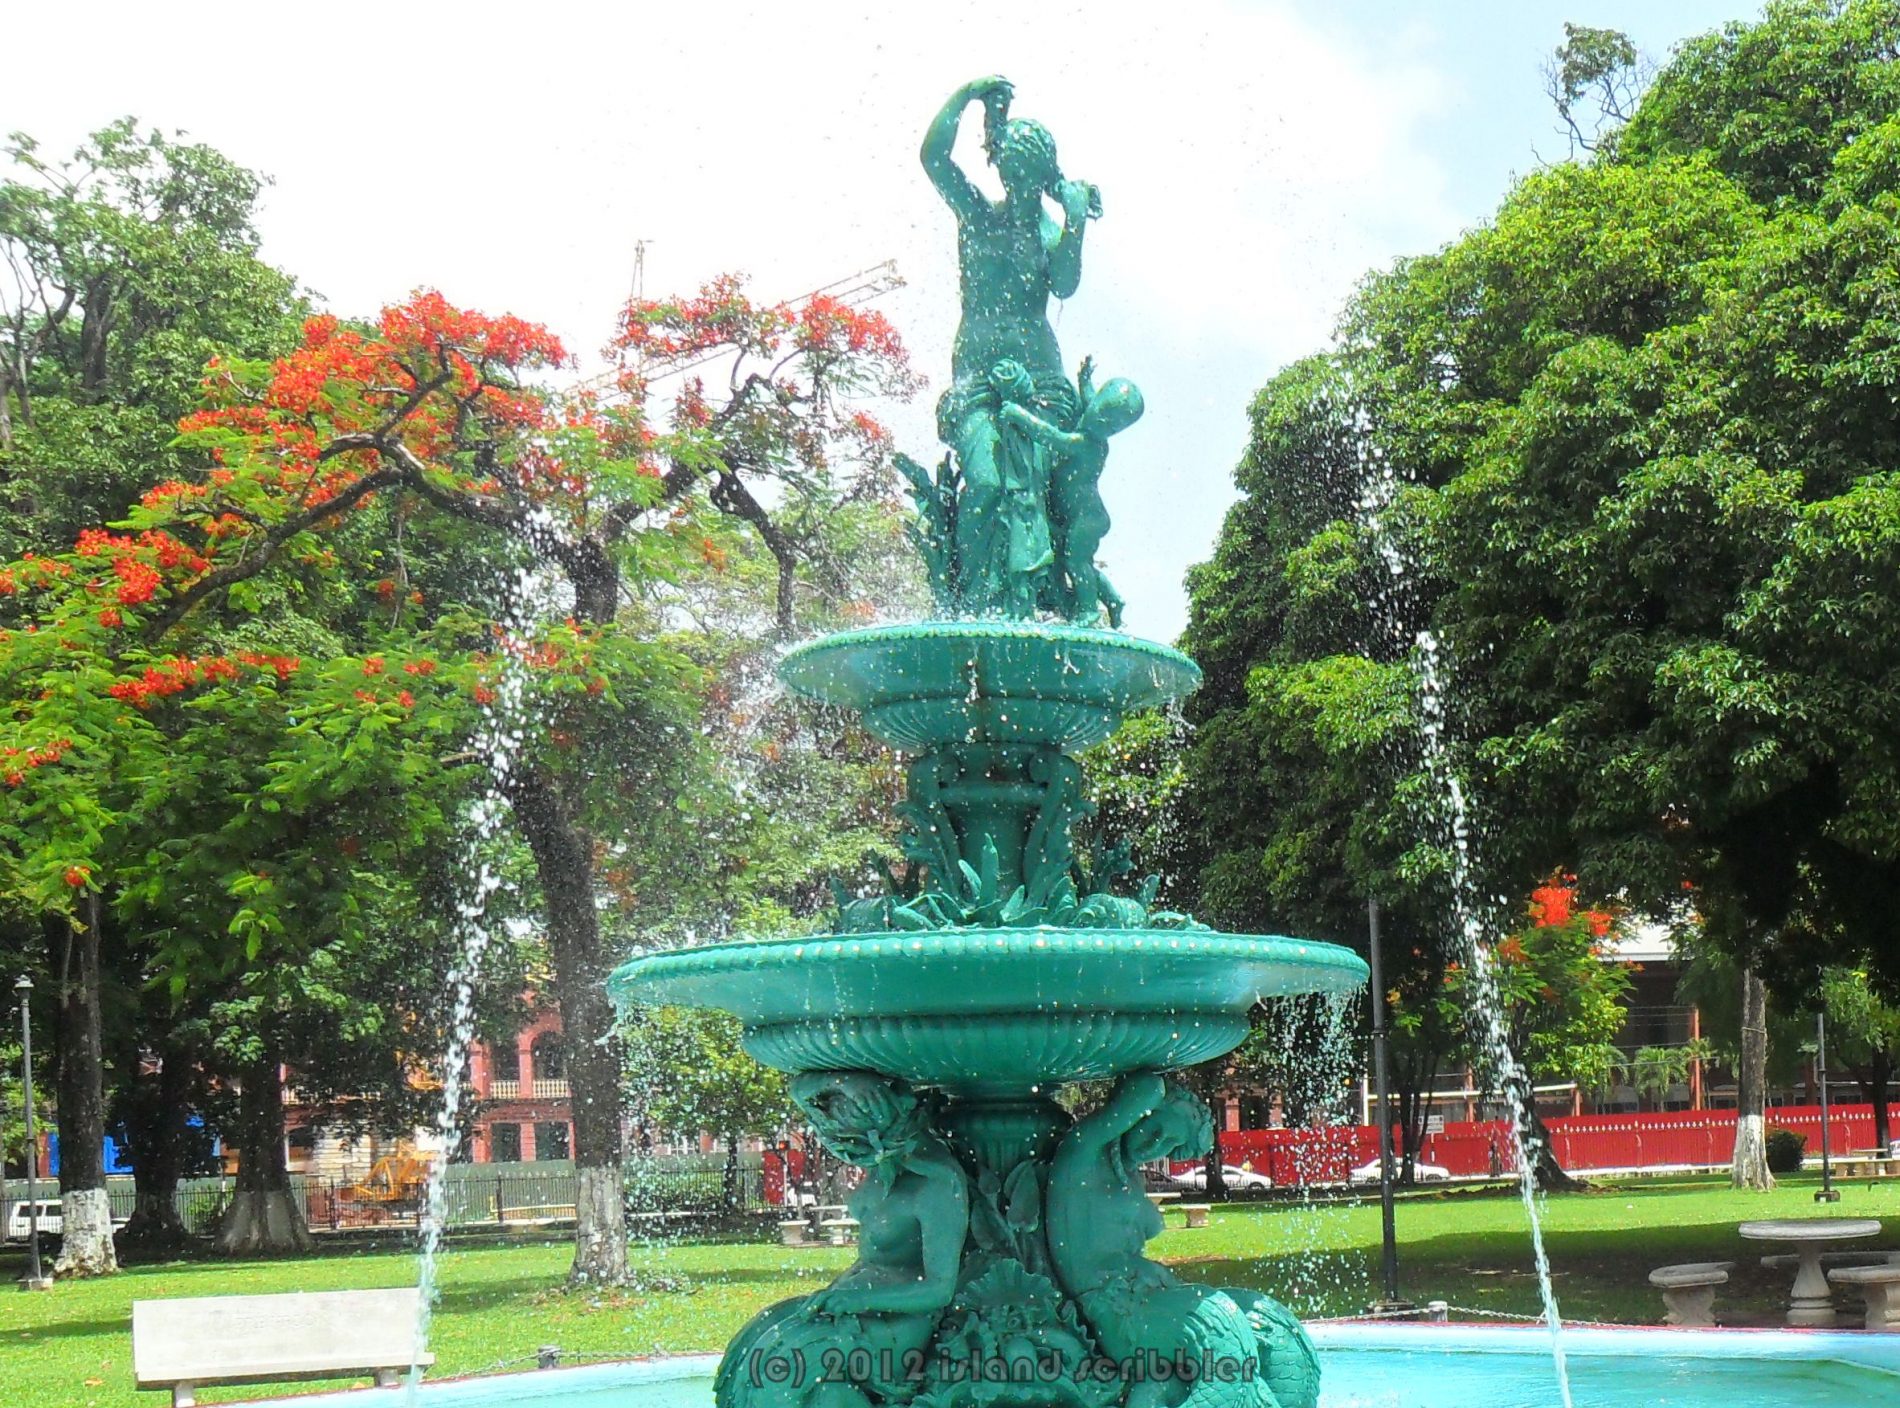 Woodford Square in Trinidad and Tobago, Caribbean | Monuments - Rated 3.2